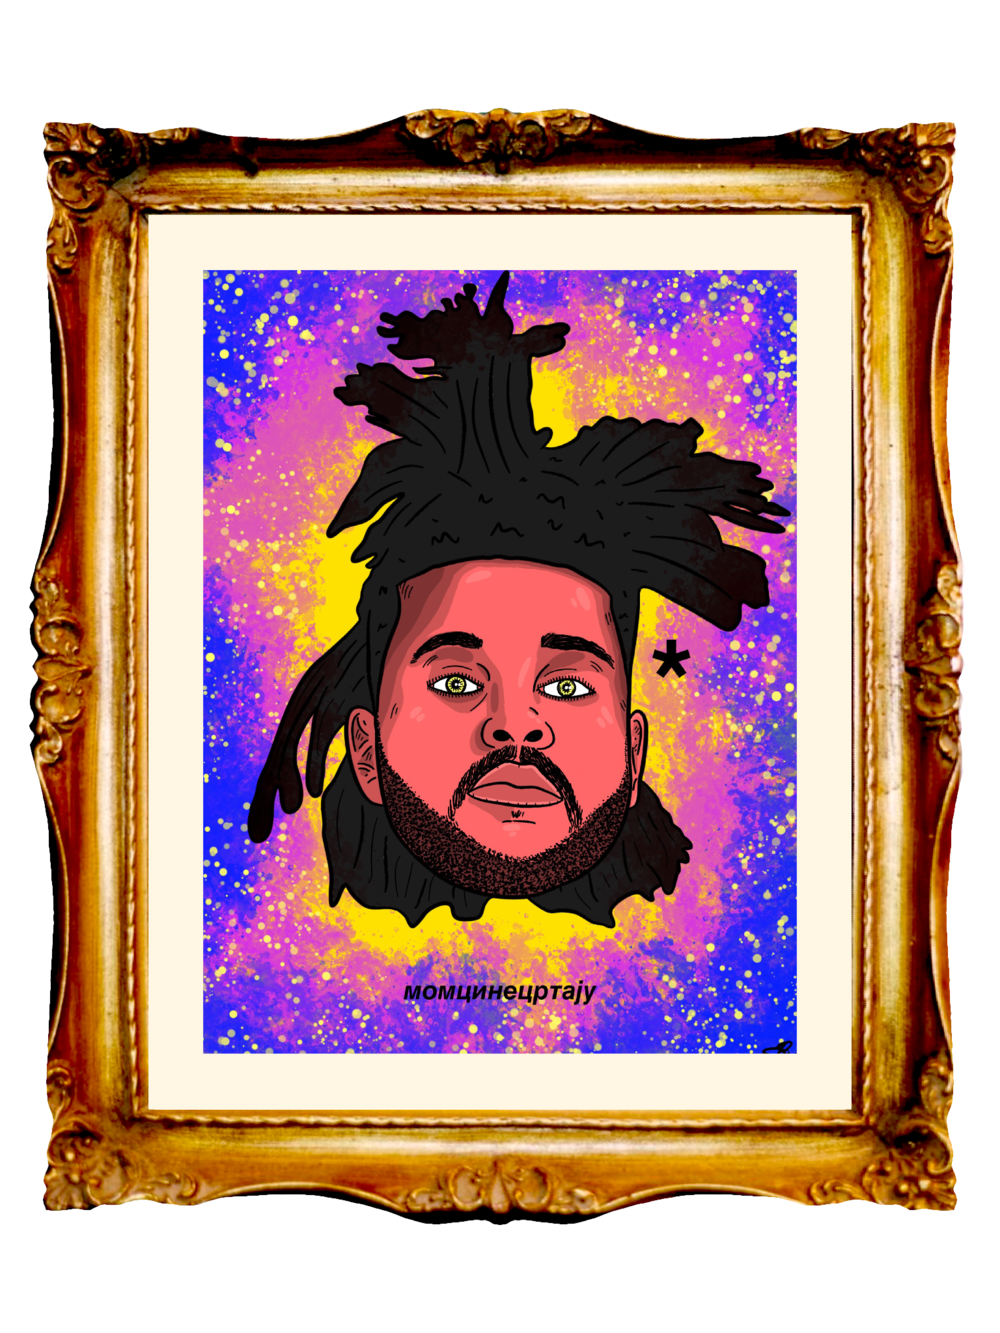 THE WEEKND - STARBOY - Limited Poster by BOYSDONTDRAW